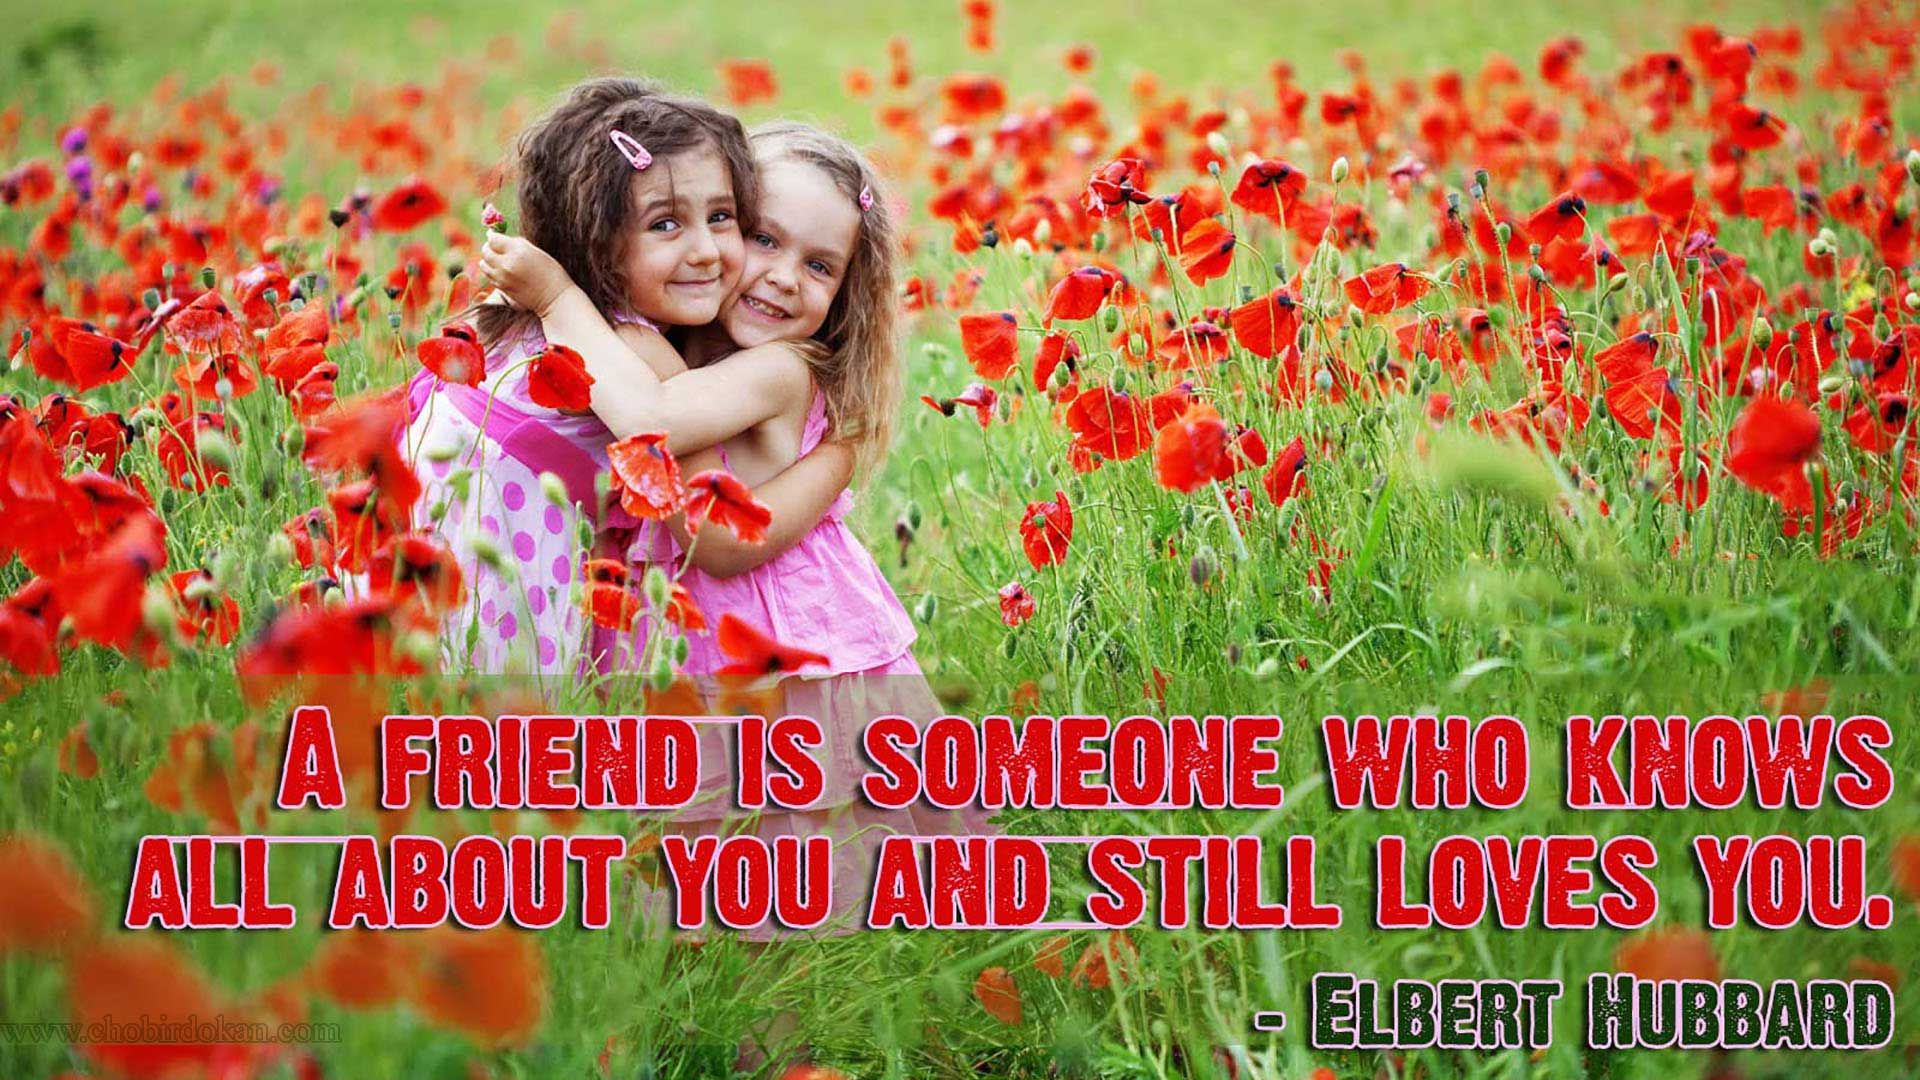 Nice Wallpapers With Friendship Quotes - HD Wallpaper 